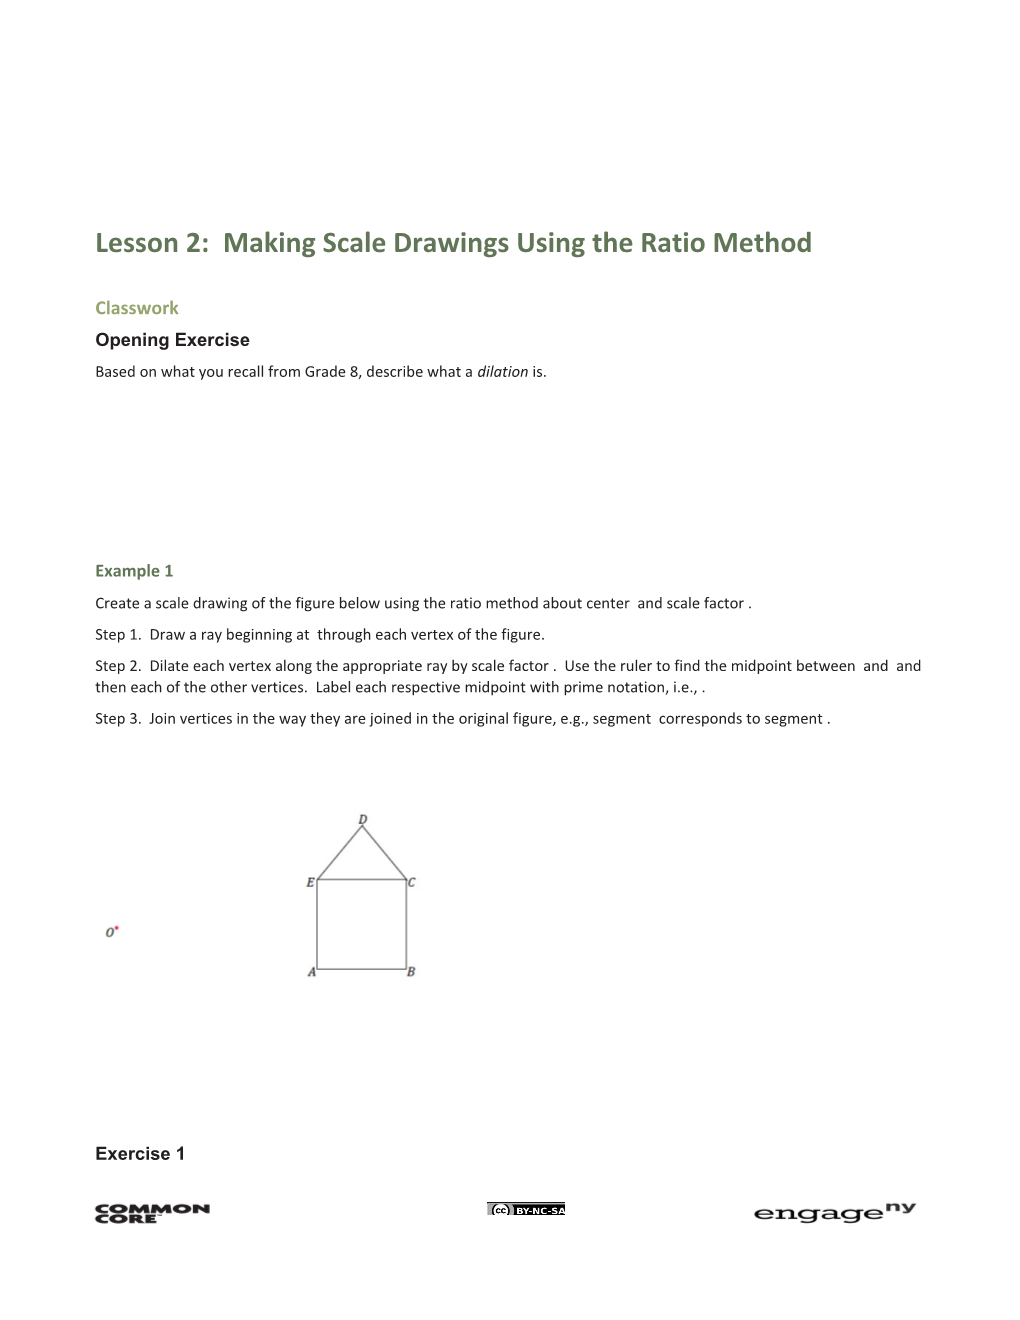 Lesson 2: Making Scale Drawings Using the Ratio Method